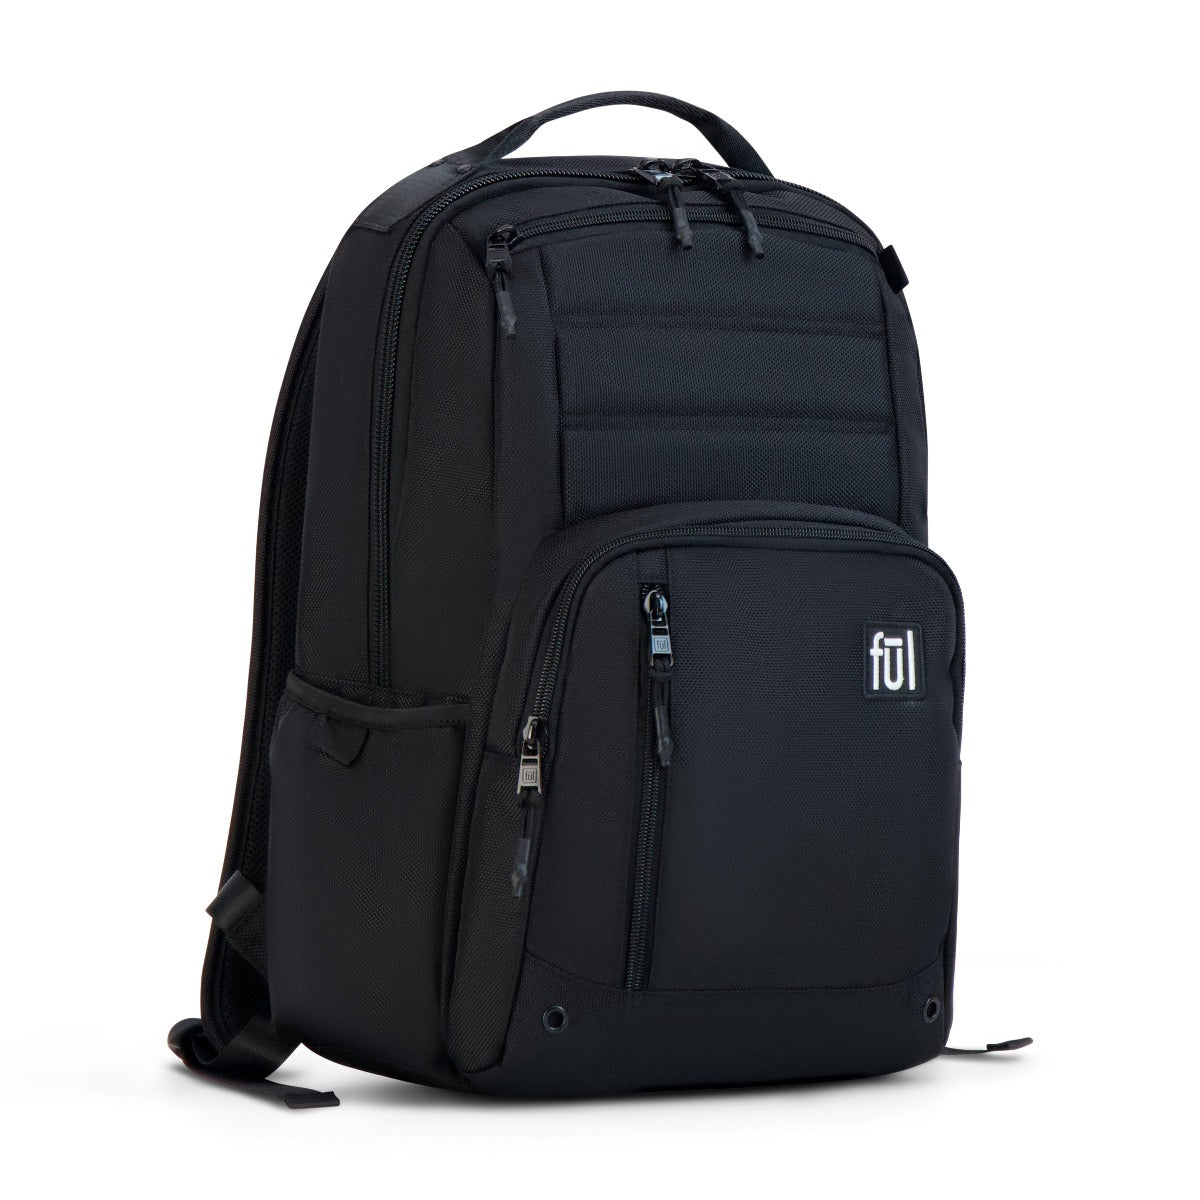 ful tactics collection phantom backpack black - ful tactics collection phantom backpack black - multiple compartment tech backpacks